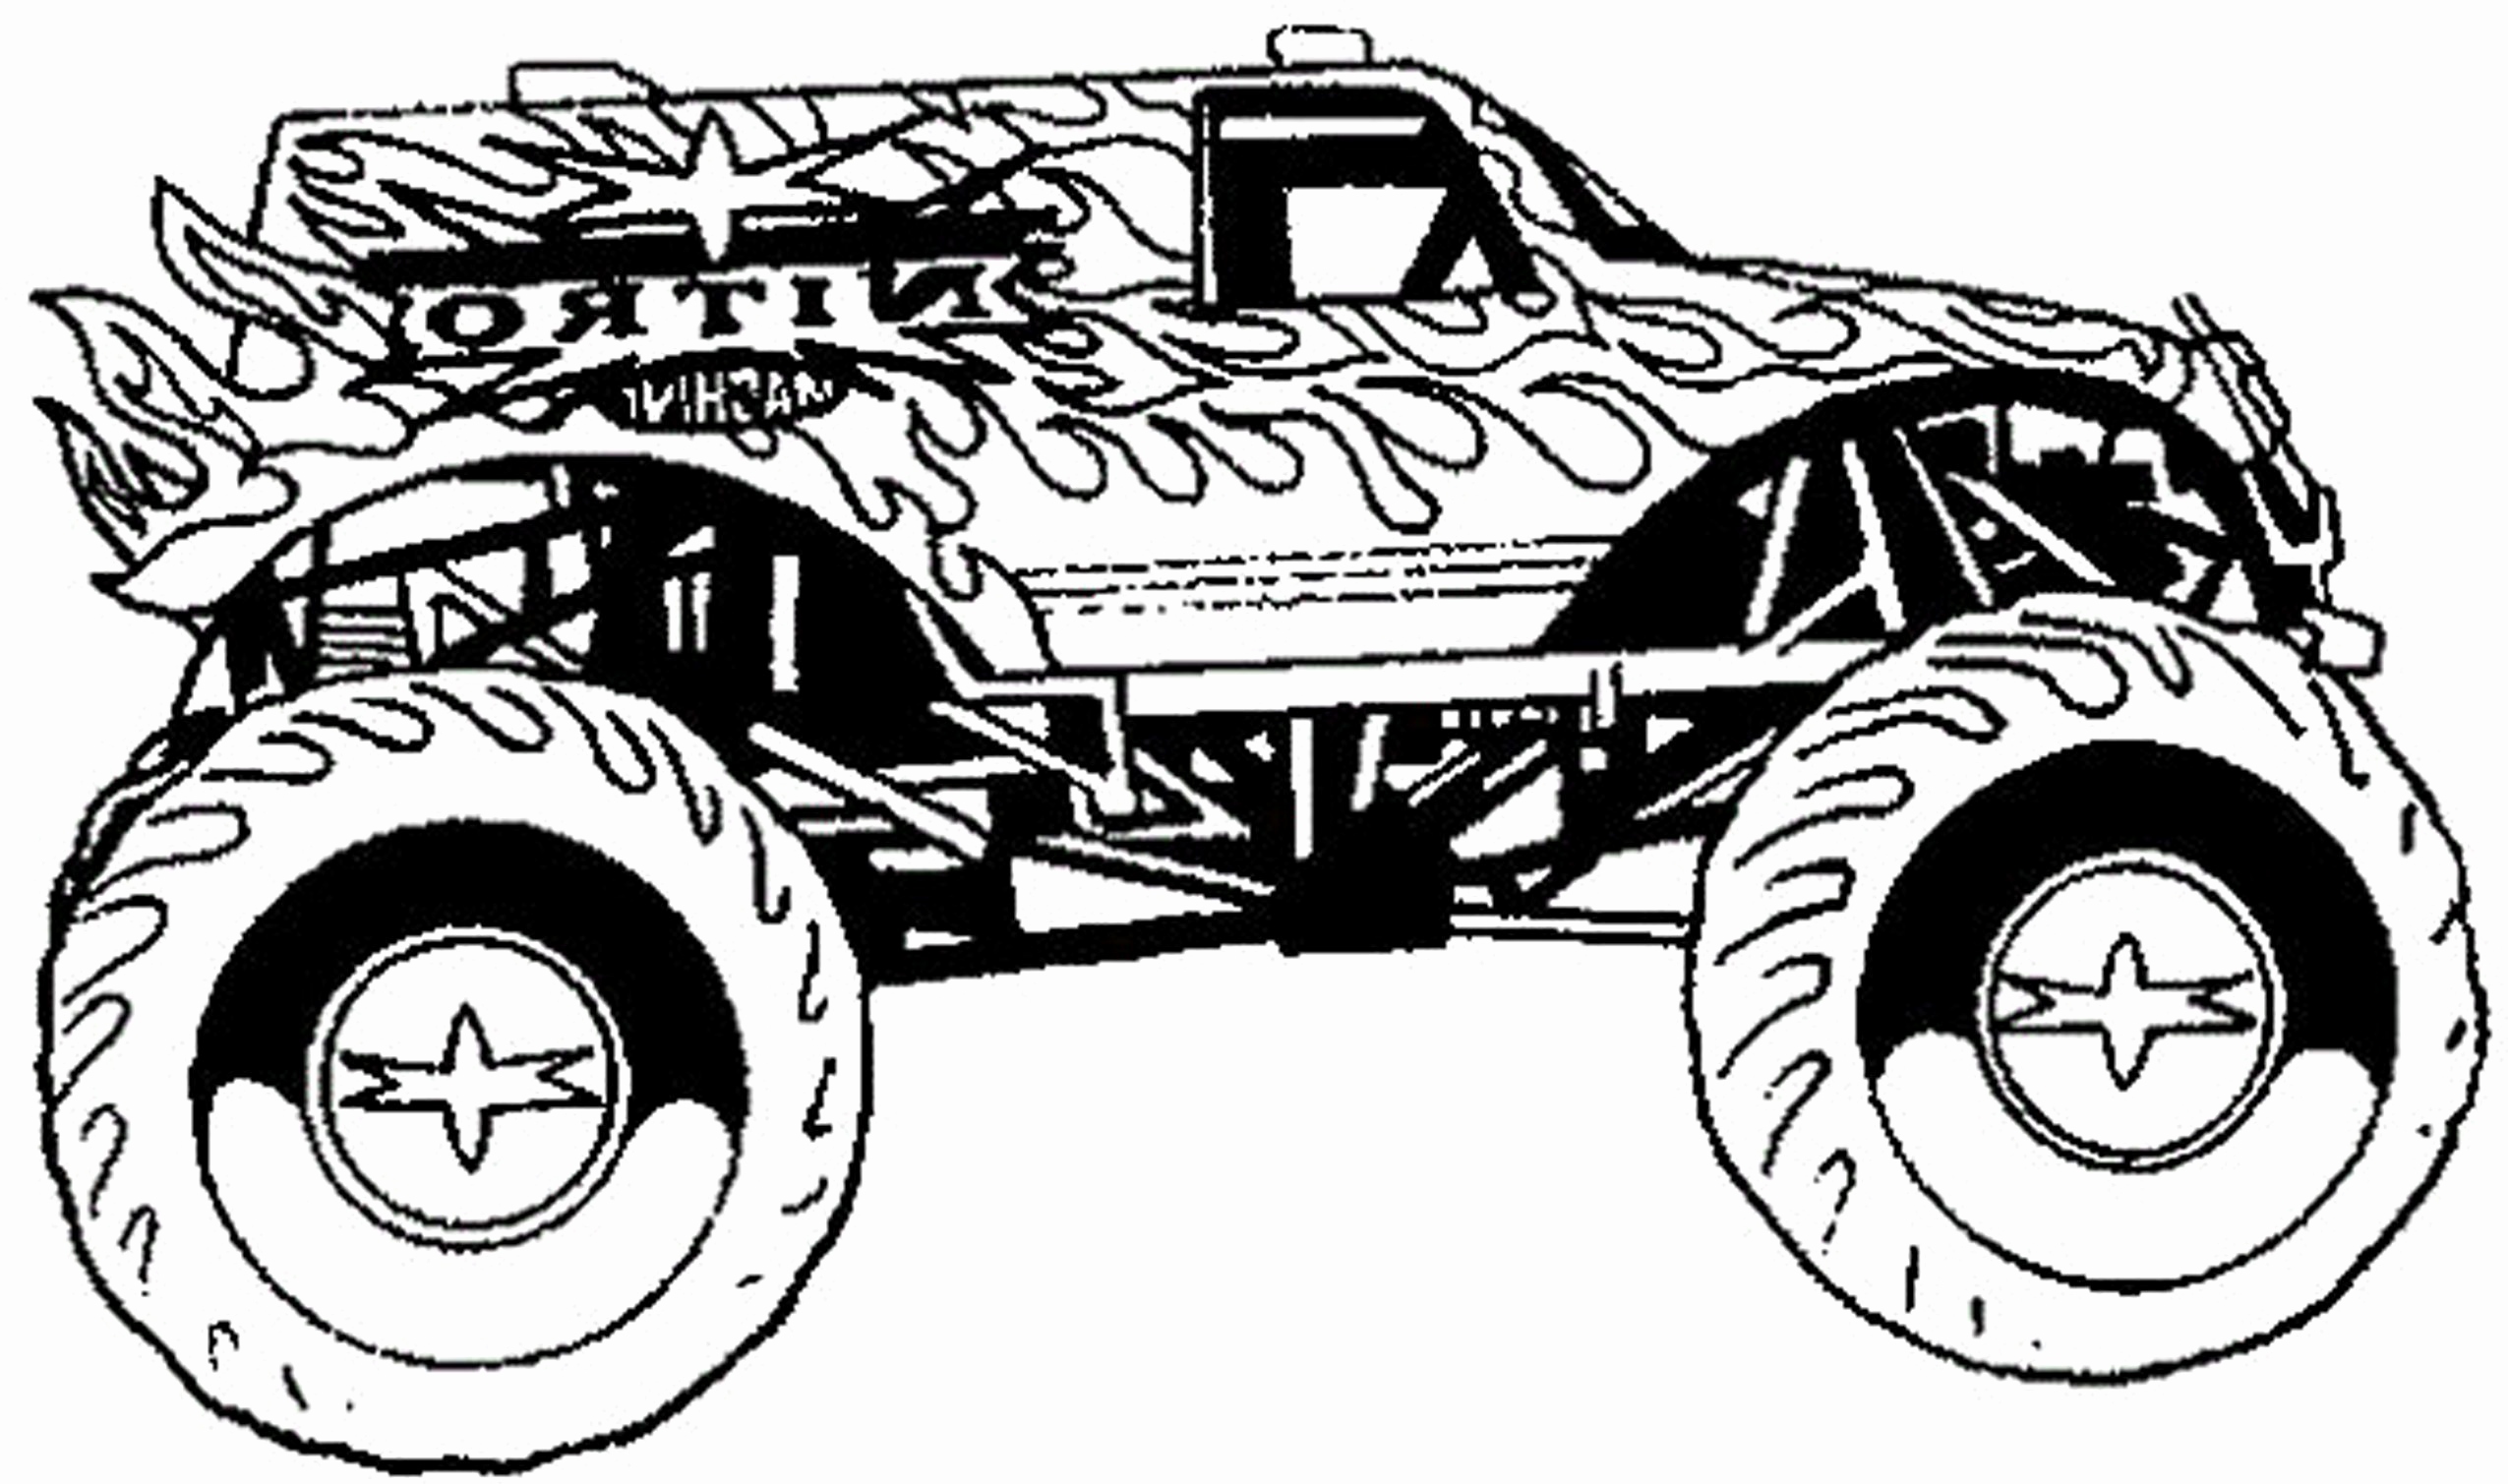 Max D Monster Truck Coloring Pages at GetColoringscom